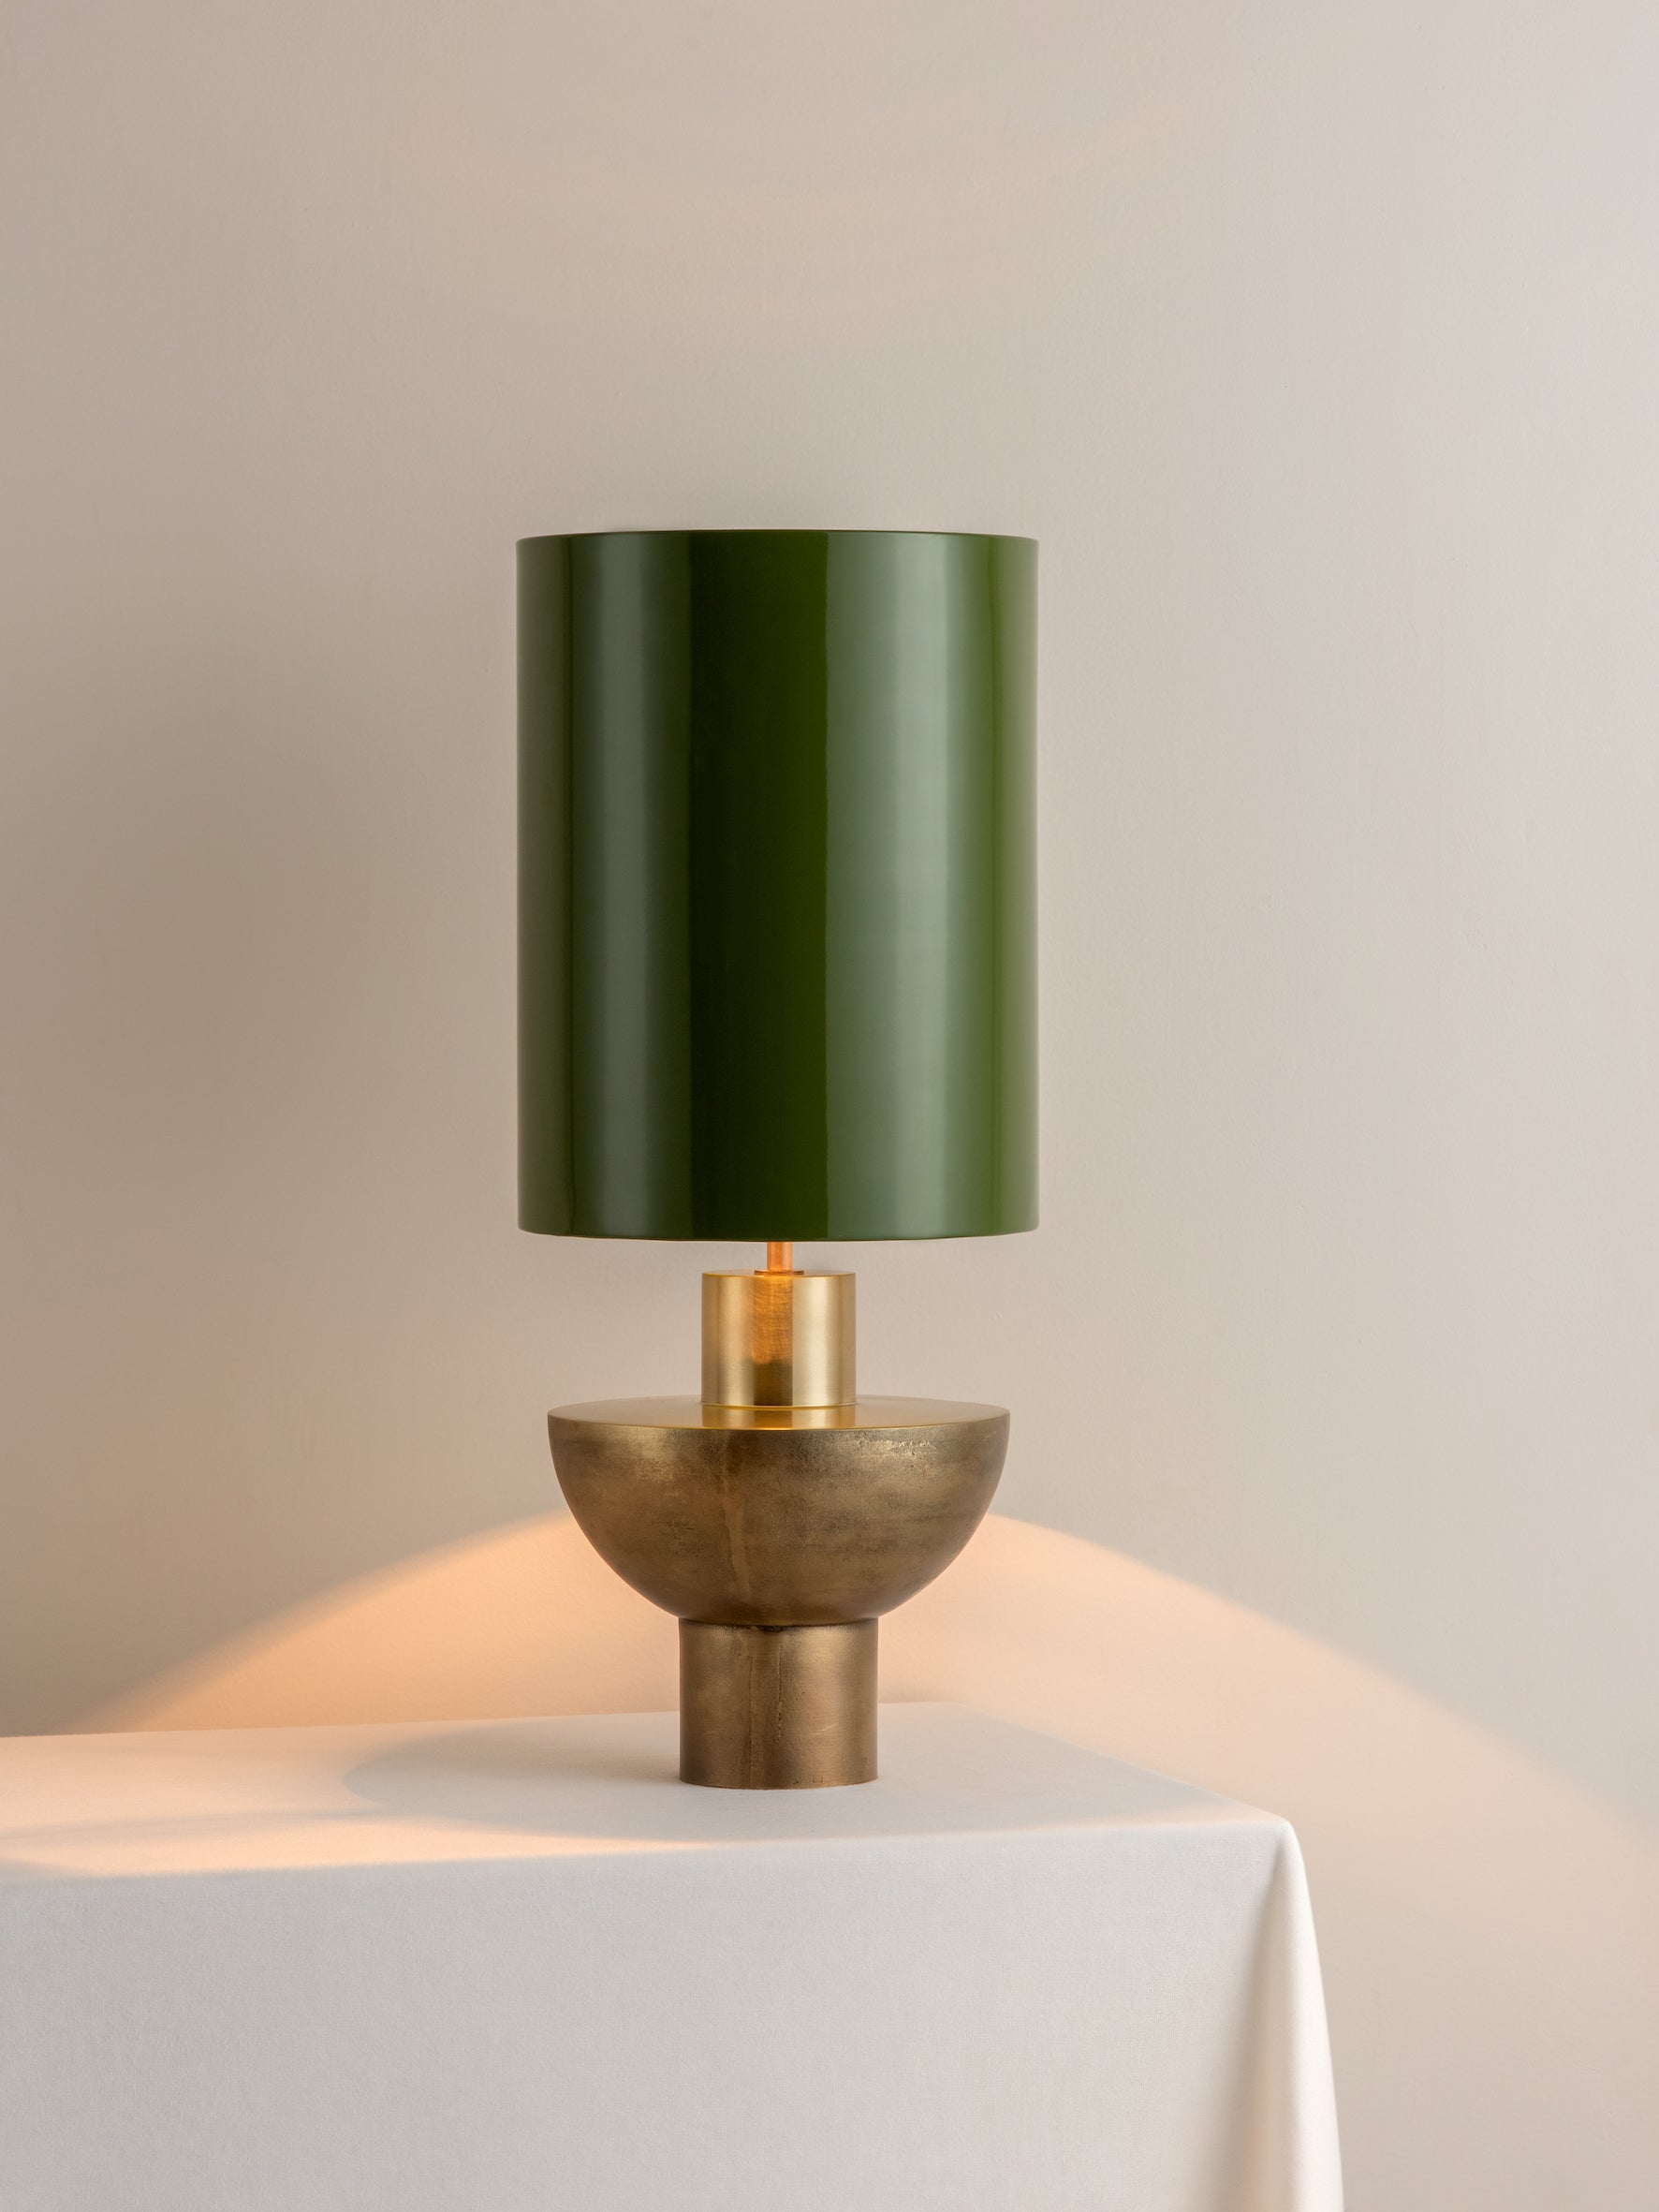 Editions brass lamp with + green lacquer shade | Table Lamp | Lights & Lamps Inc | Modern Affordable Designer Lighting | USA